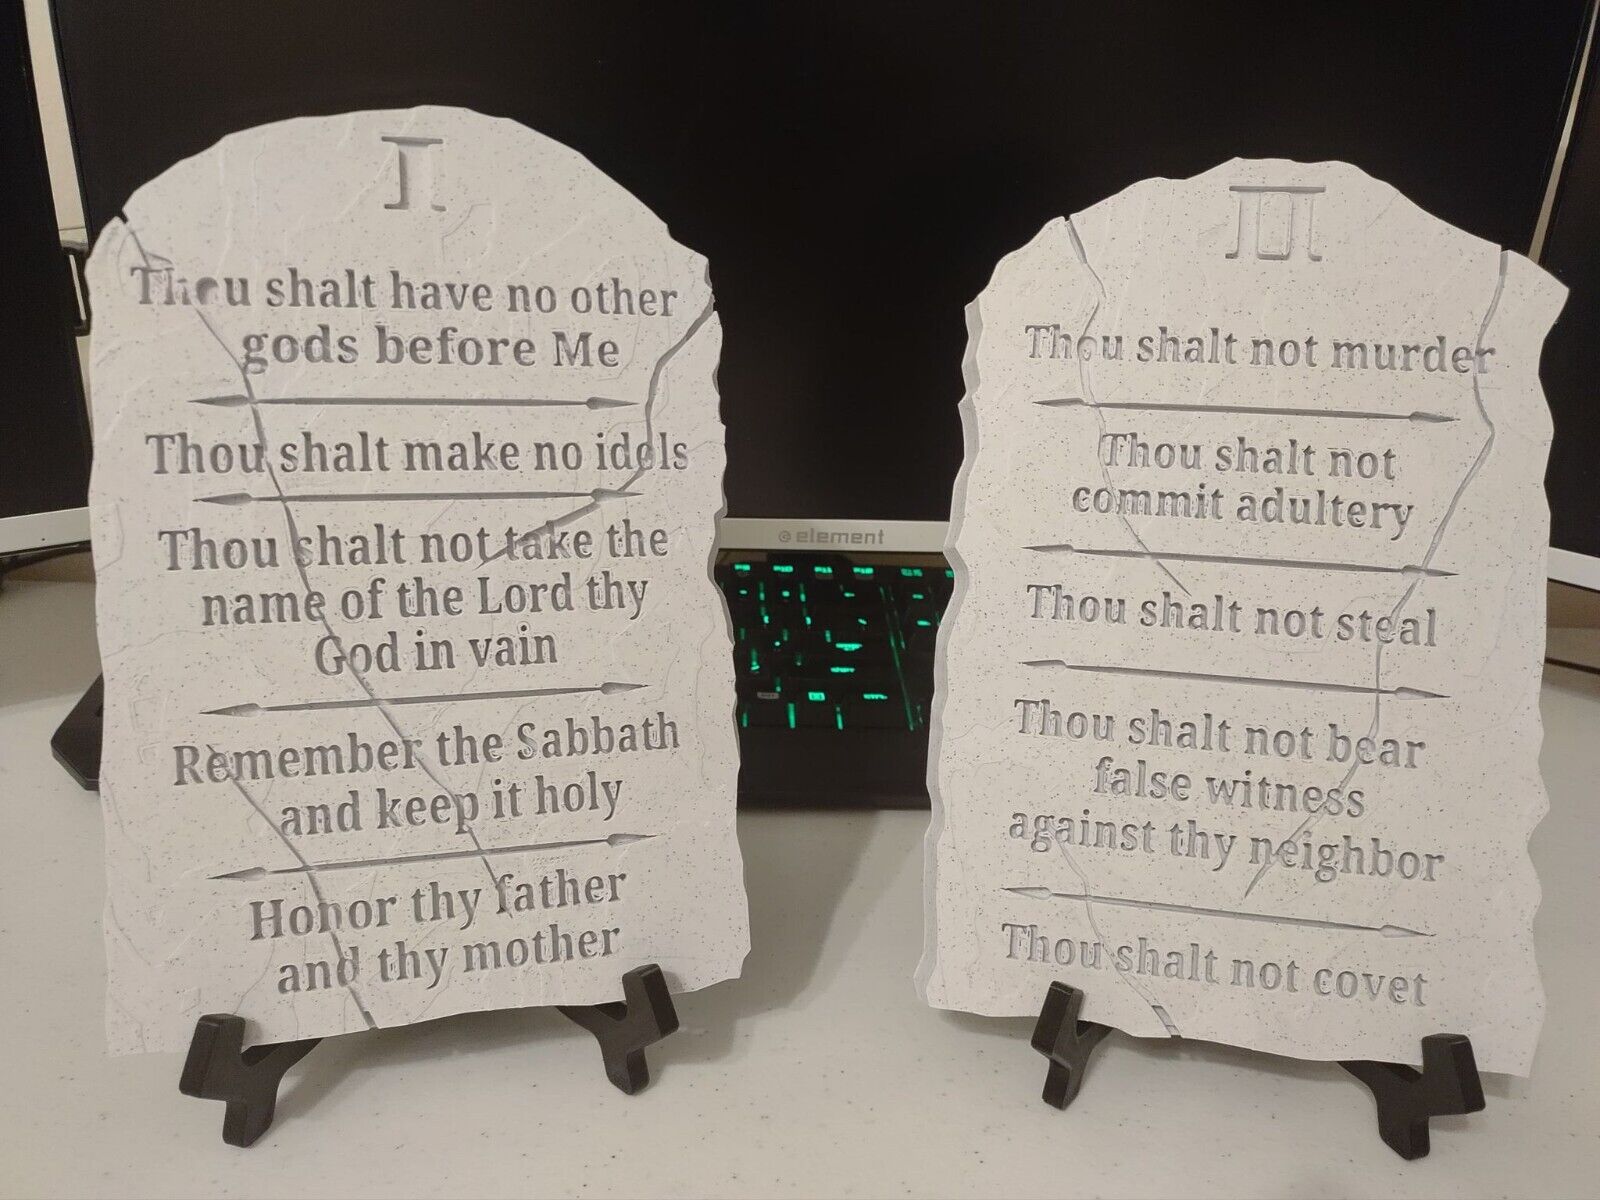 Church 10 commandments Tablets - 3d printed, 9x6 Inches - 2 FREE Black Stands